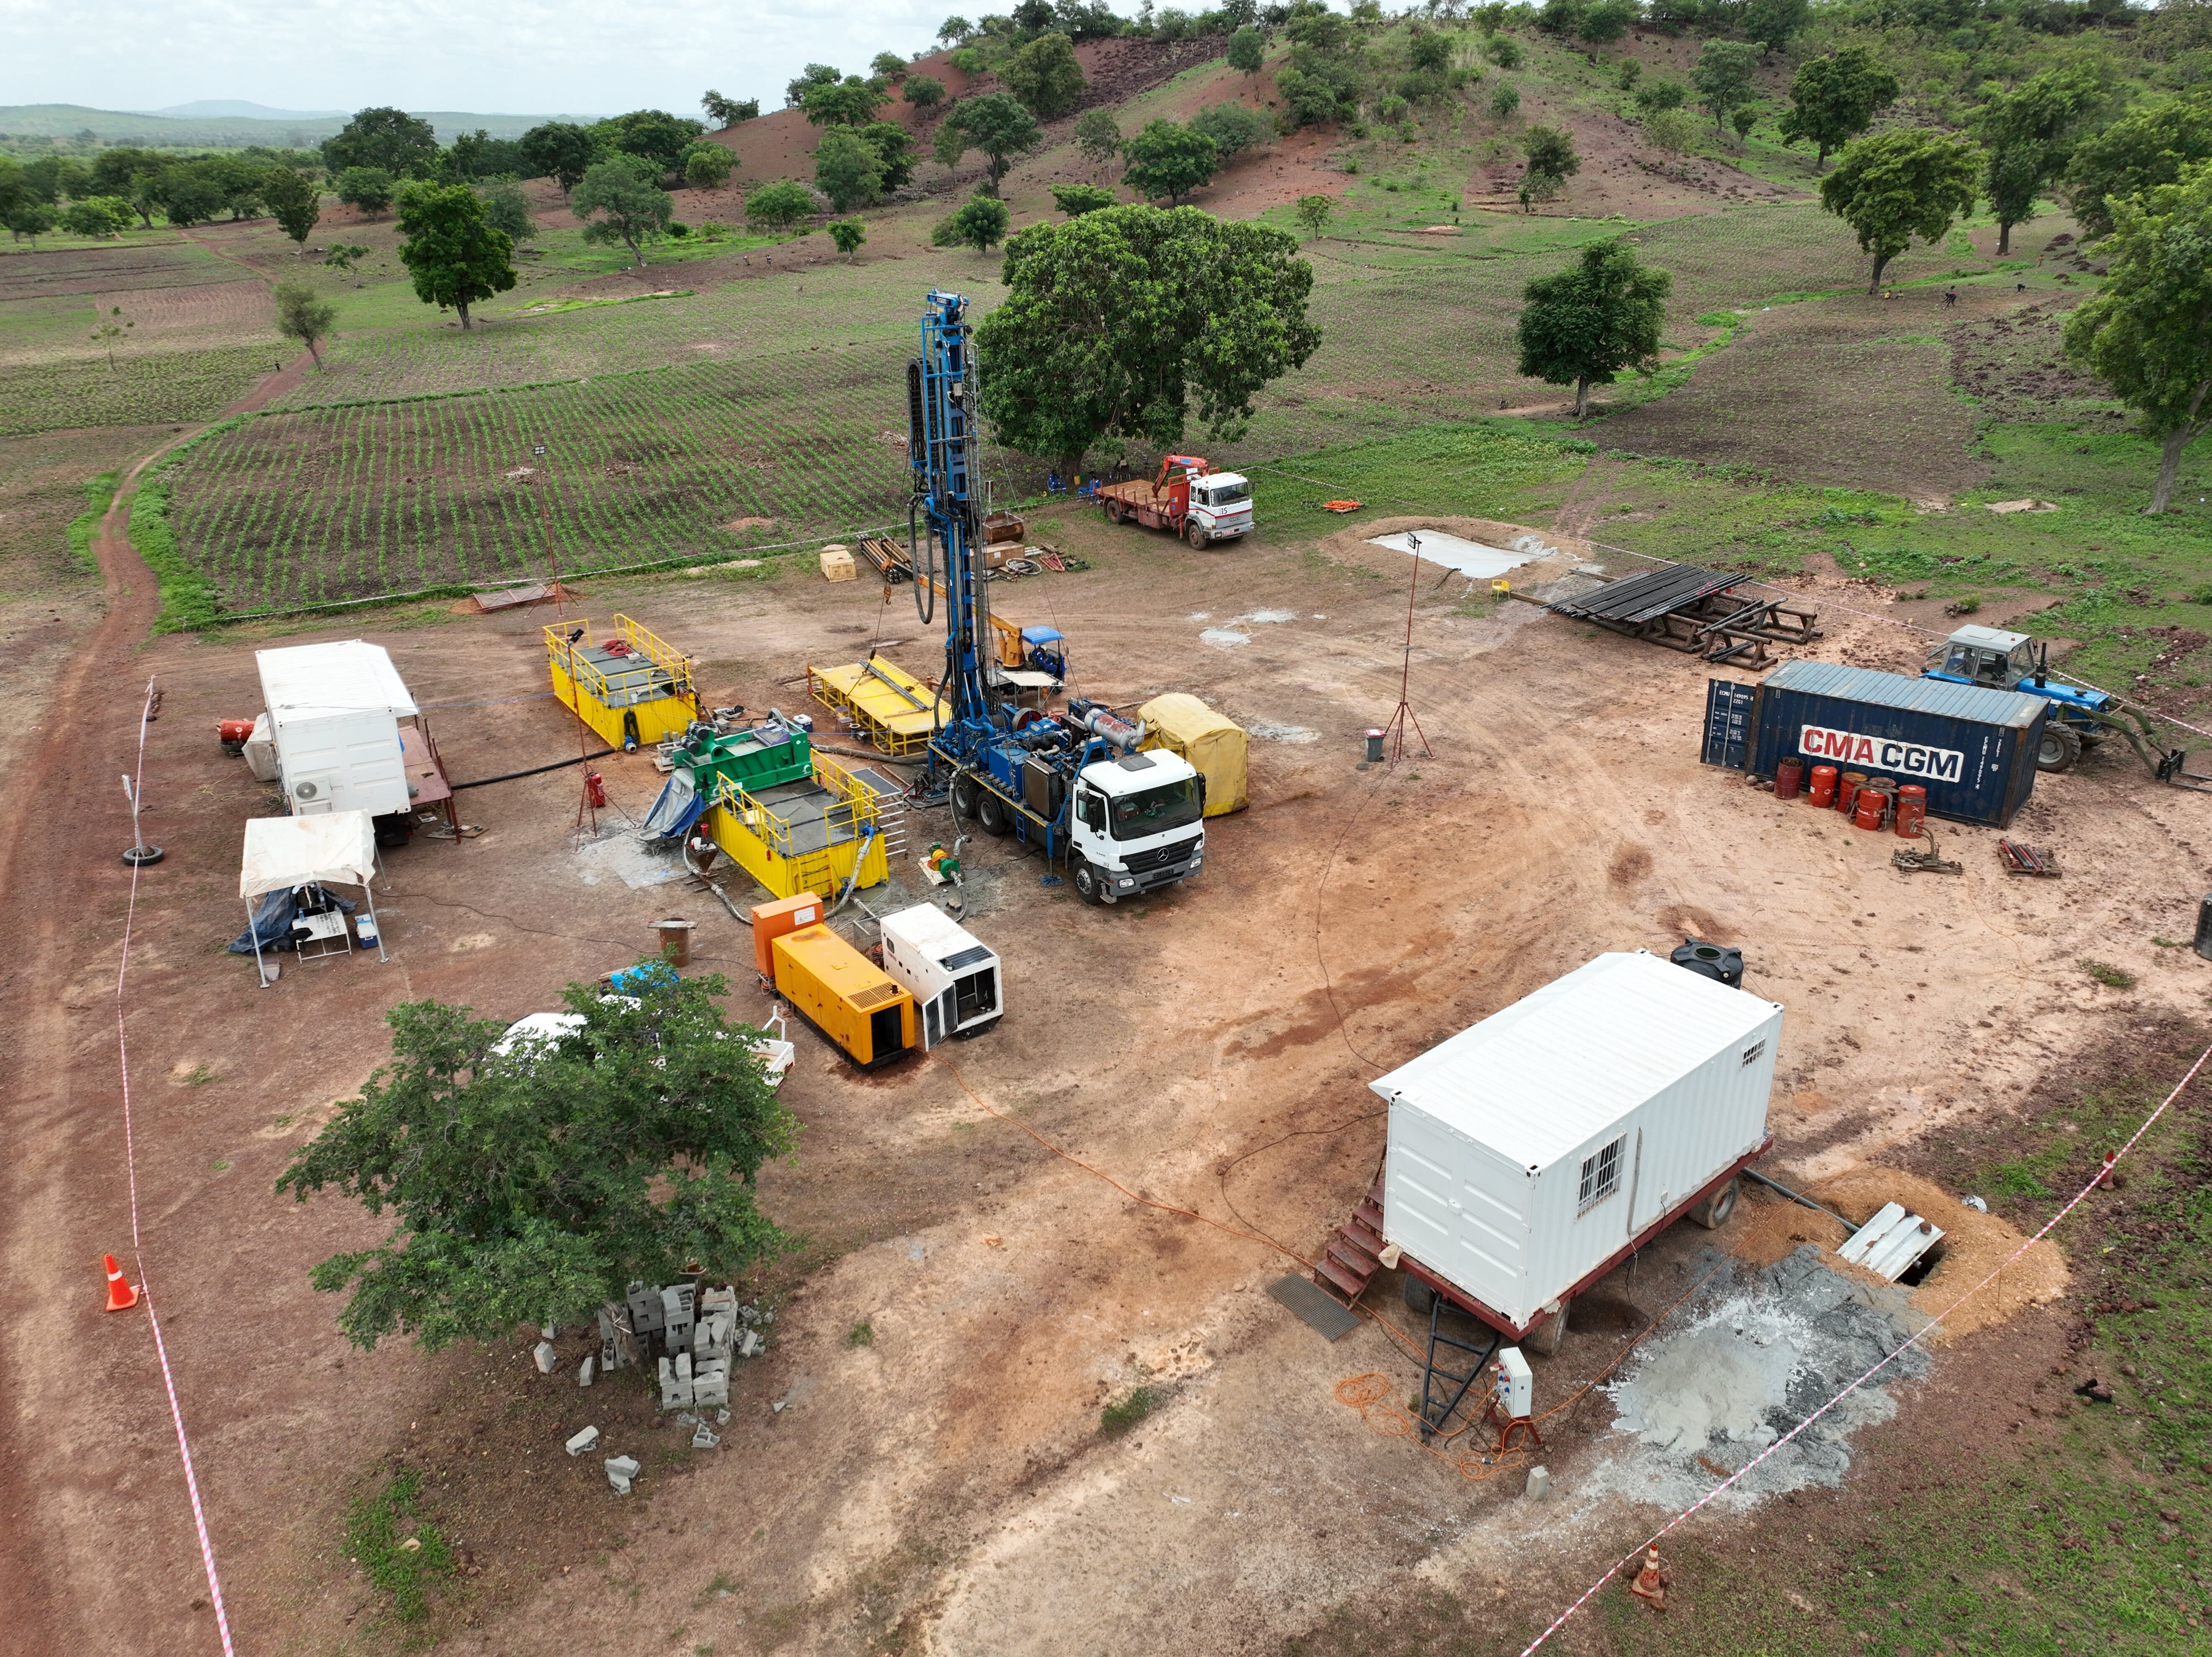 Hydroma’s operations in Mali. In the past 15 years, the company has drilled 30 wells across an area the size of Switzerland in the landlocked West African nation